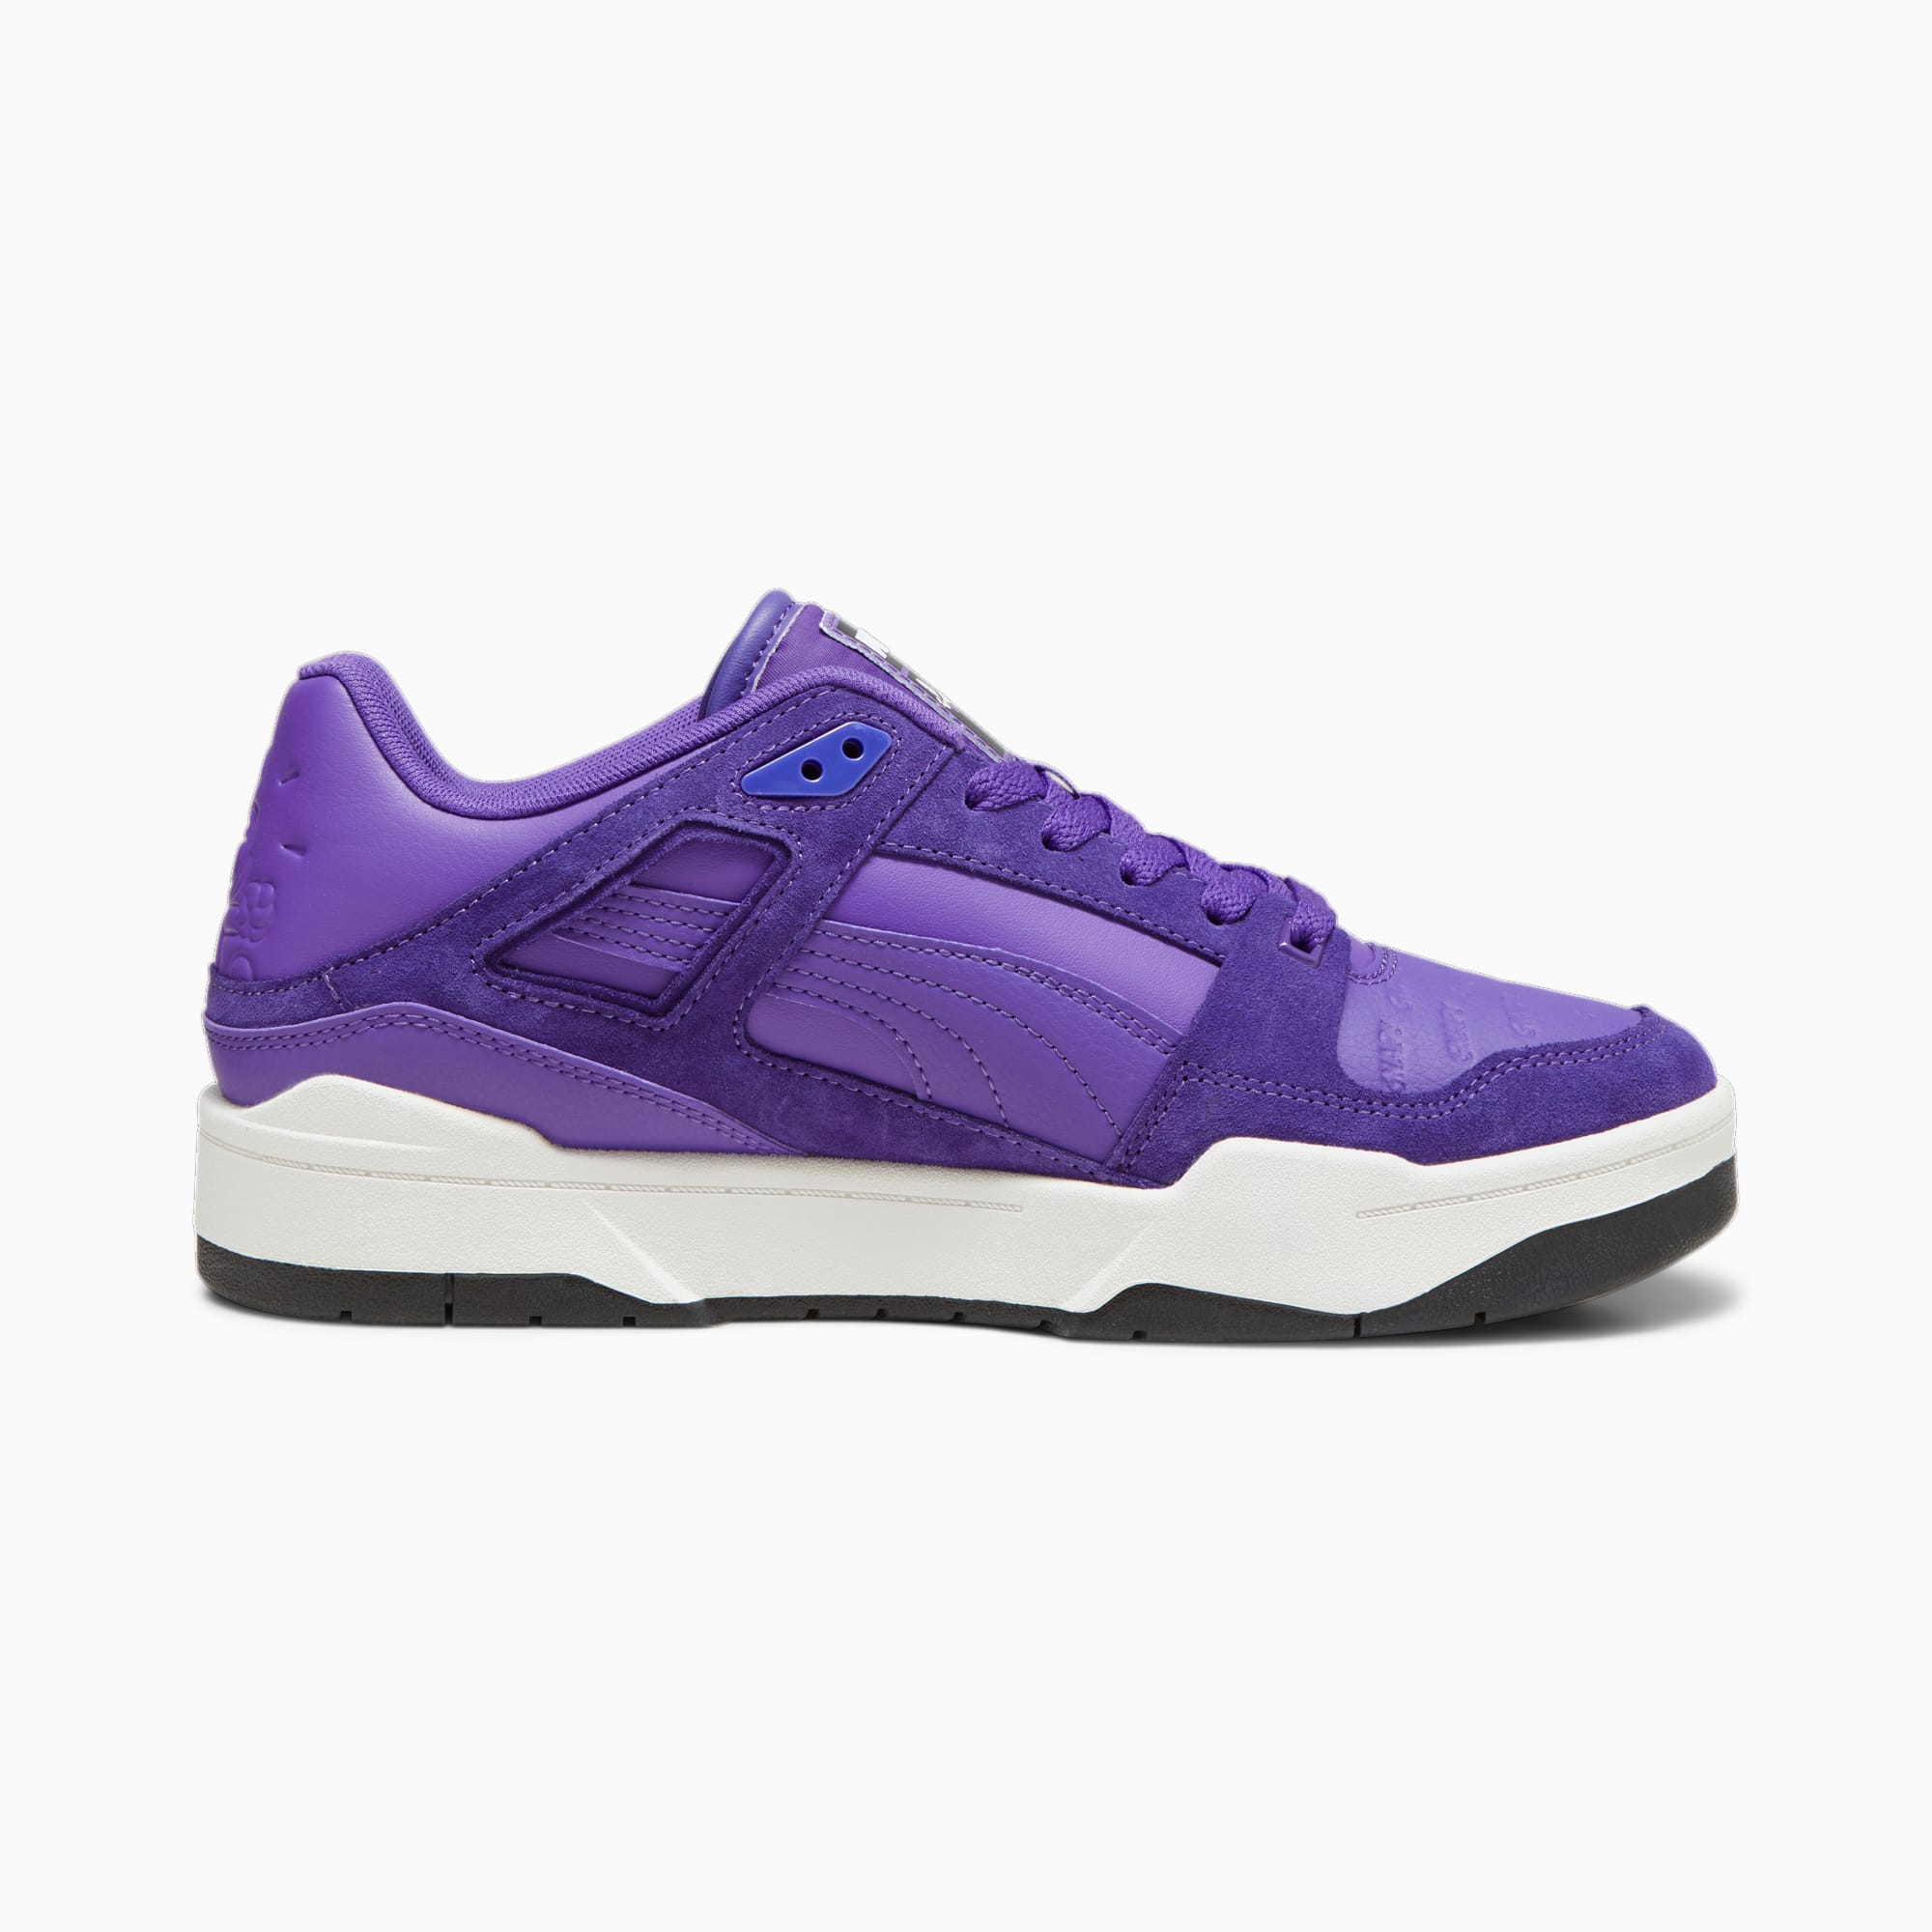 Women's PUMA X The Smurfs Slipstream Sneakers, Violet/Black, Size 35,5, Shoes